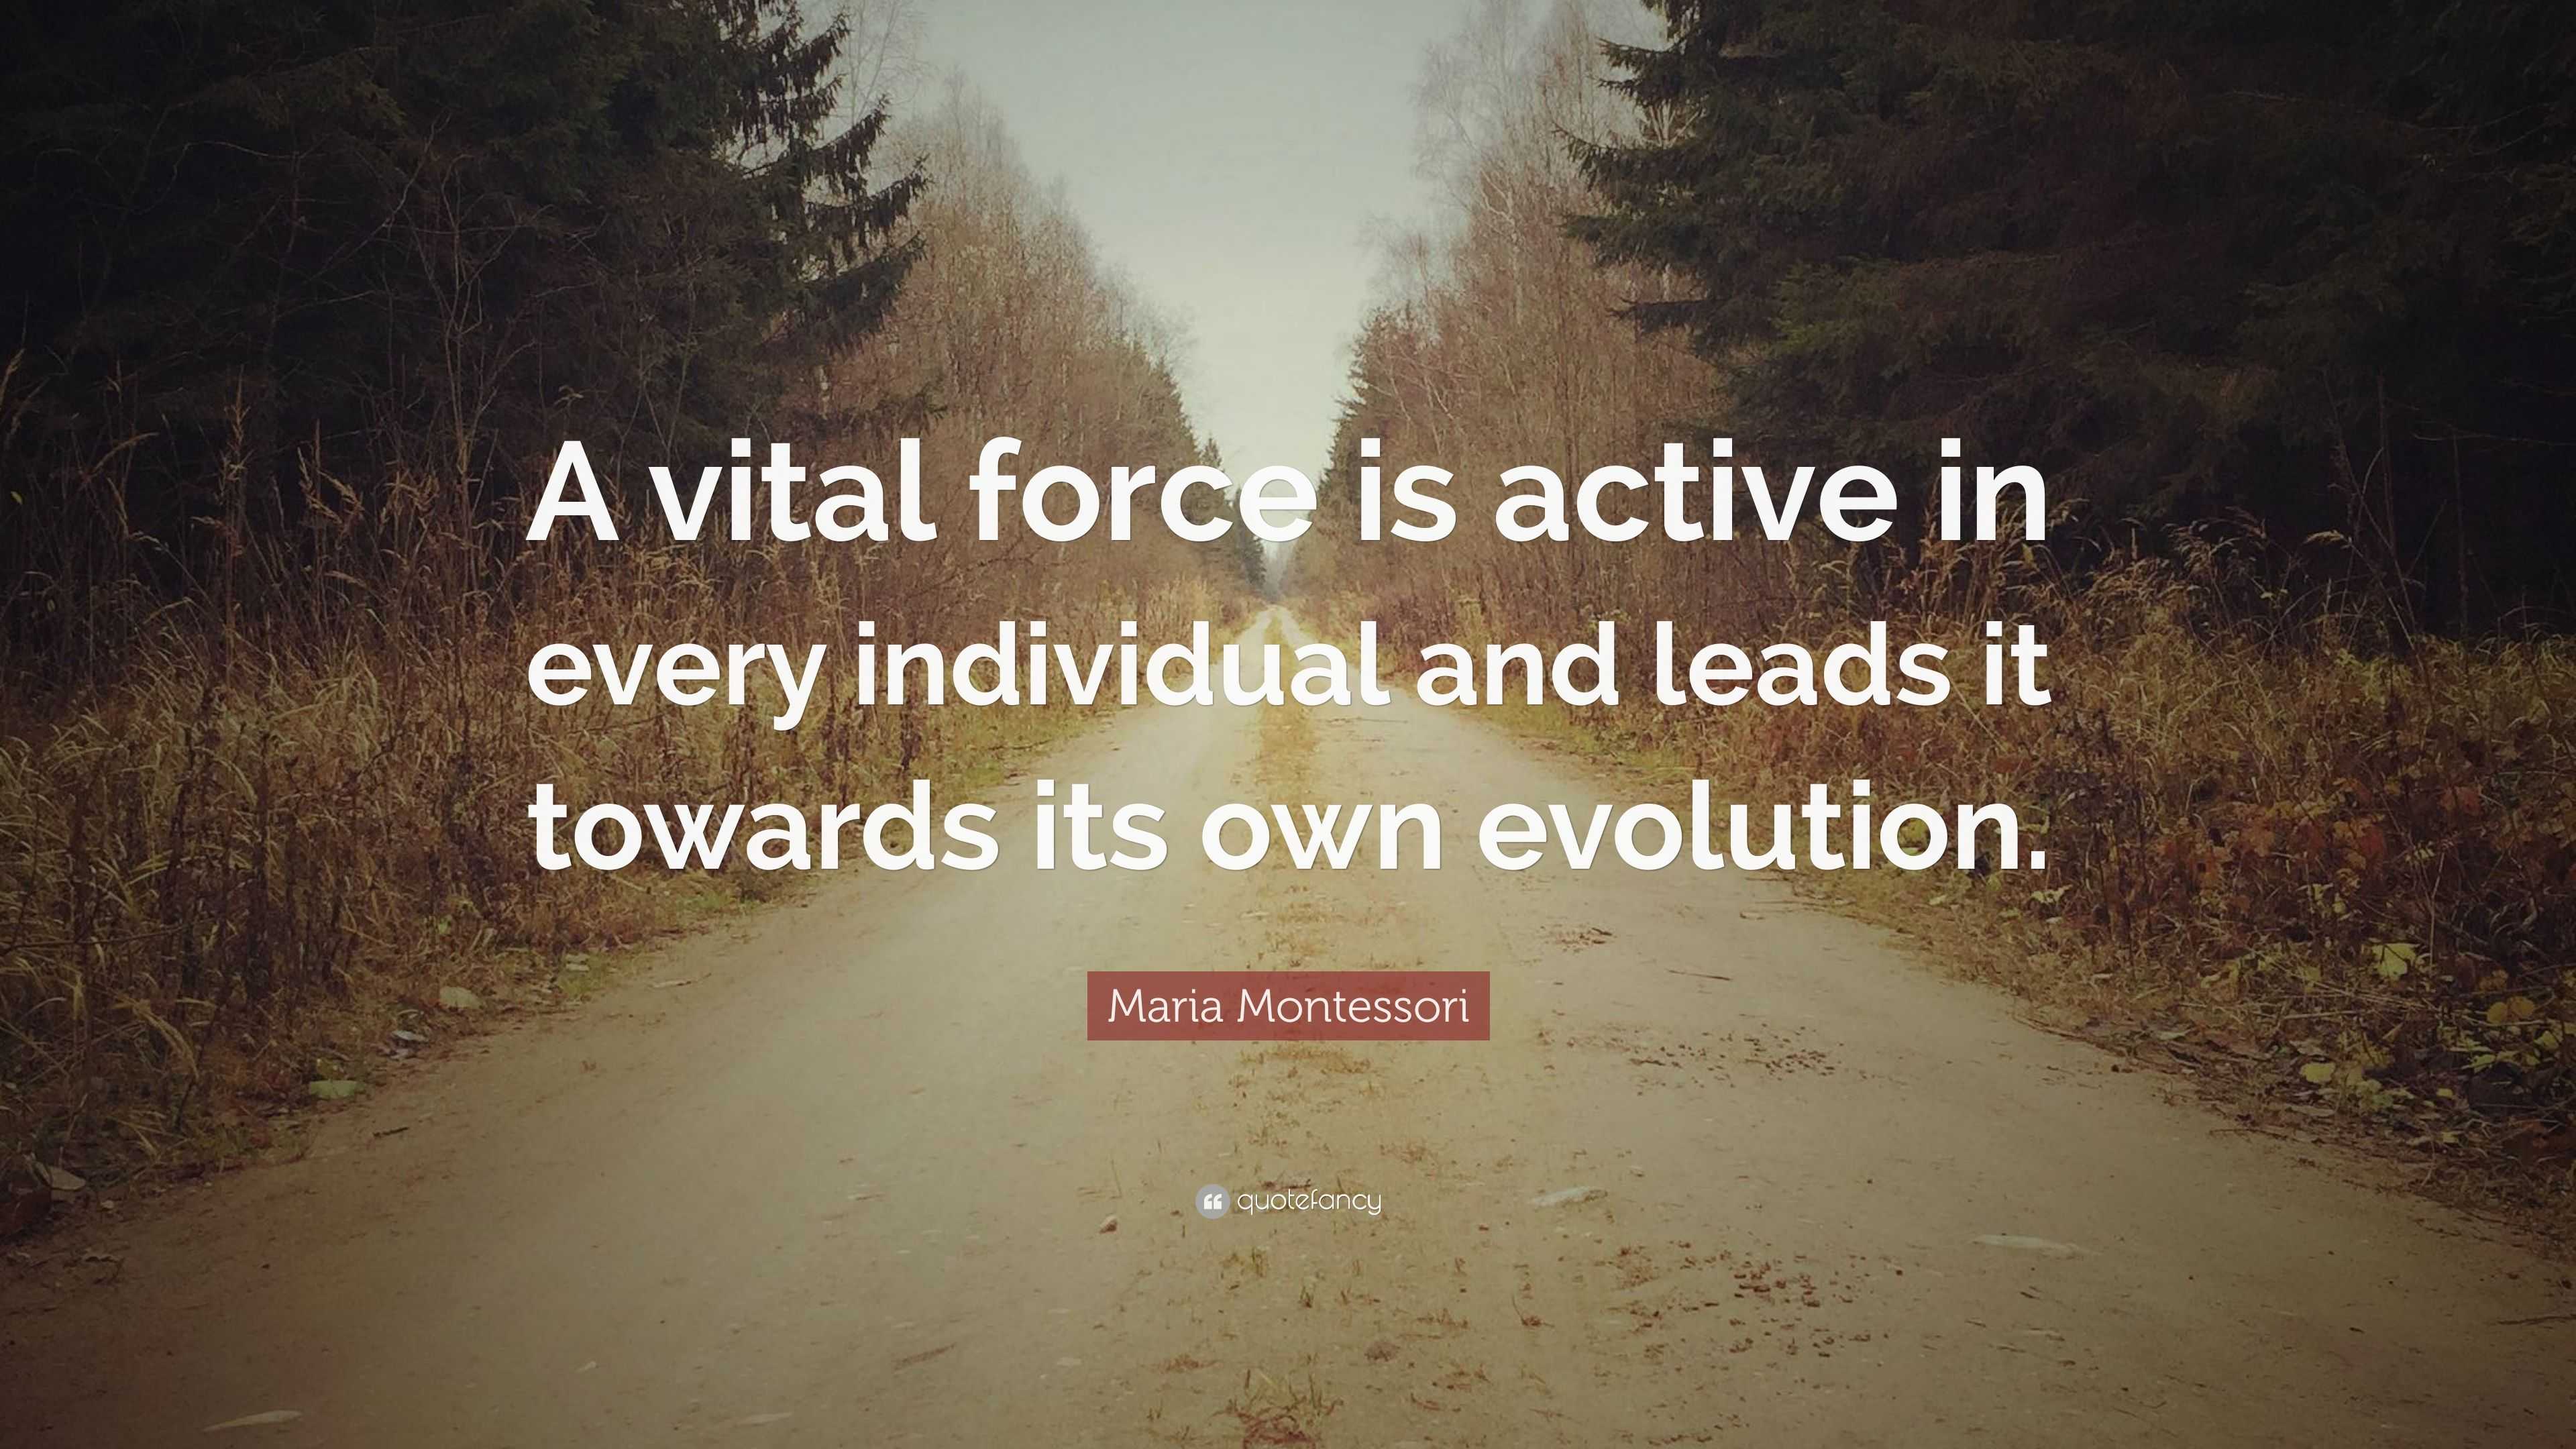 Maria Montessori Quote: “A vital force is active in every individual ...